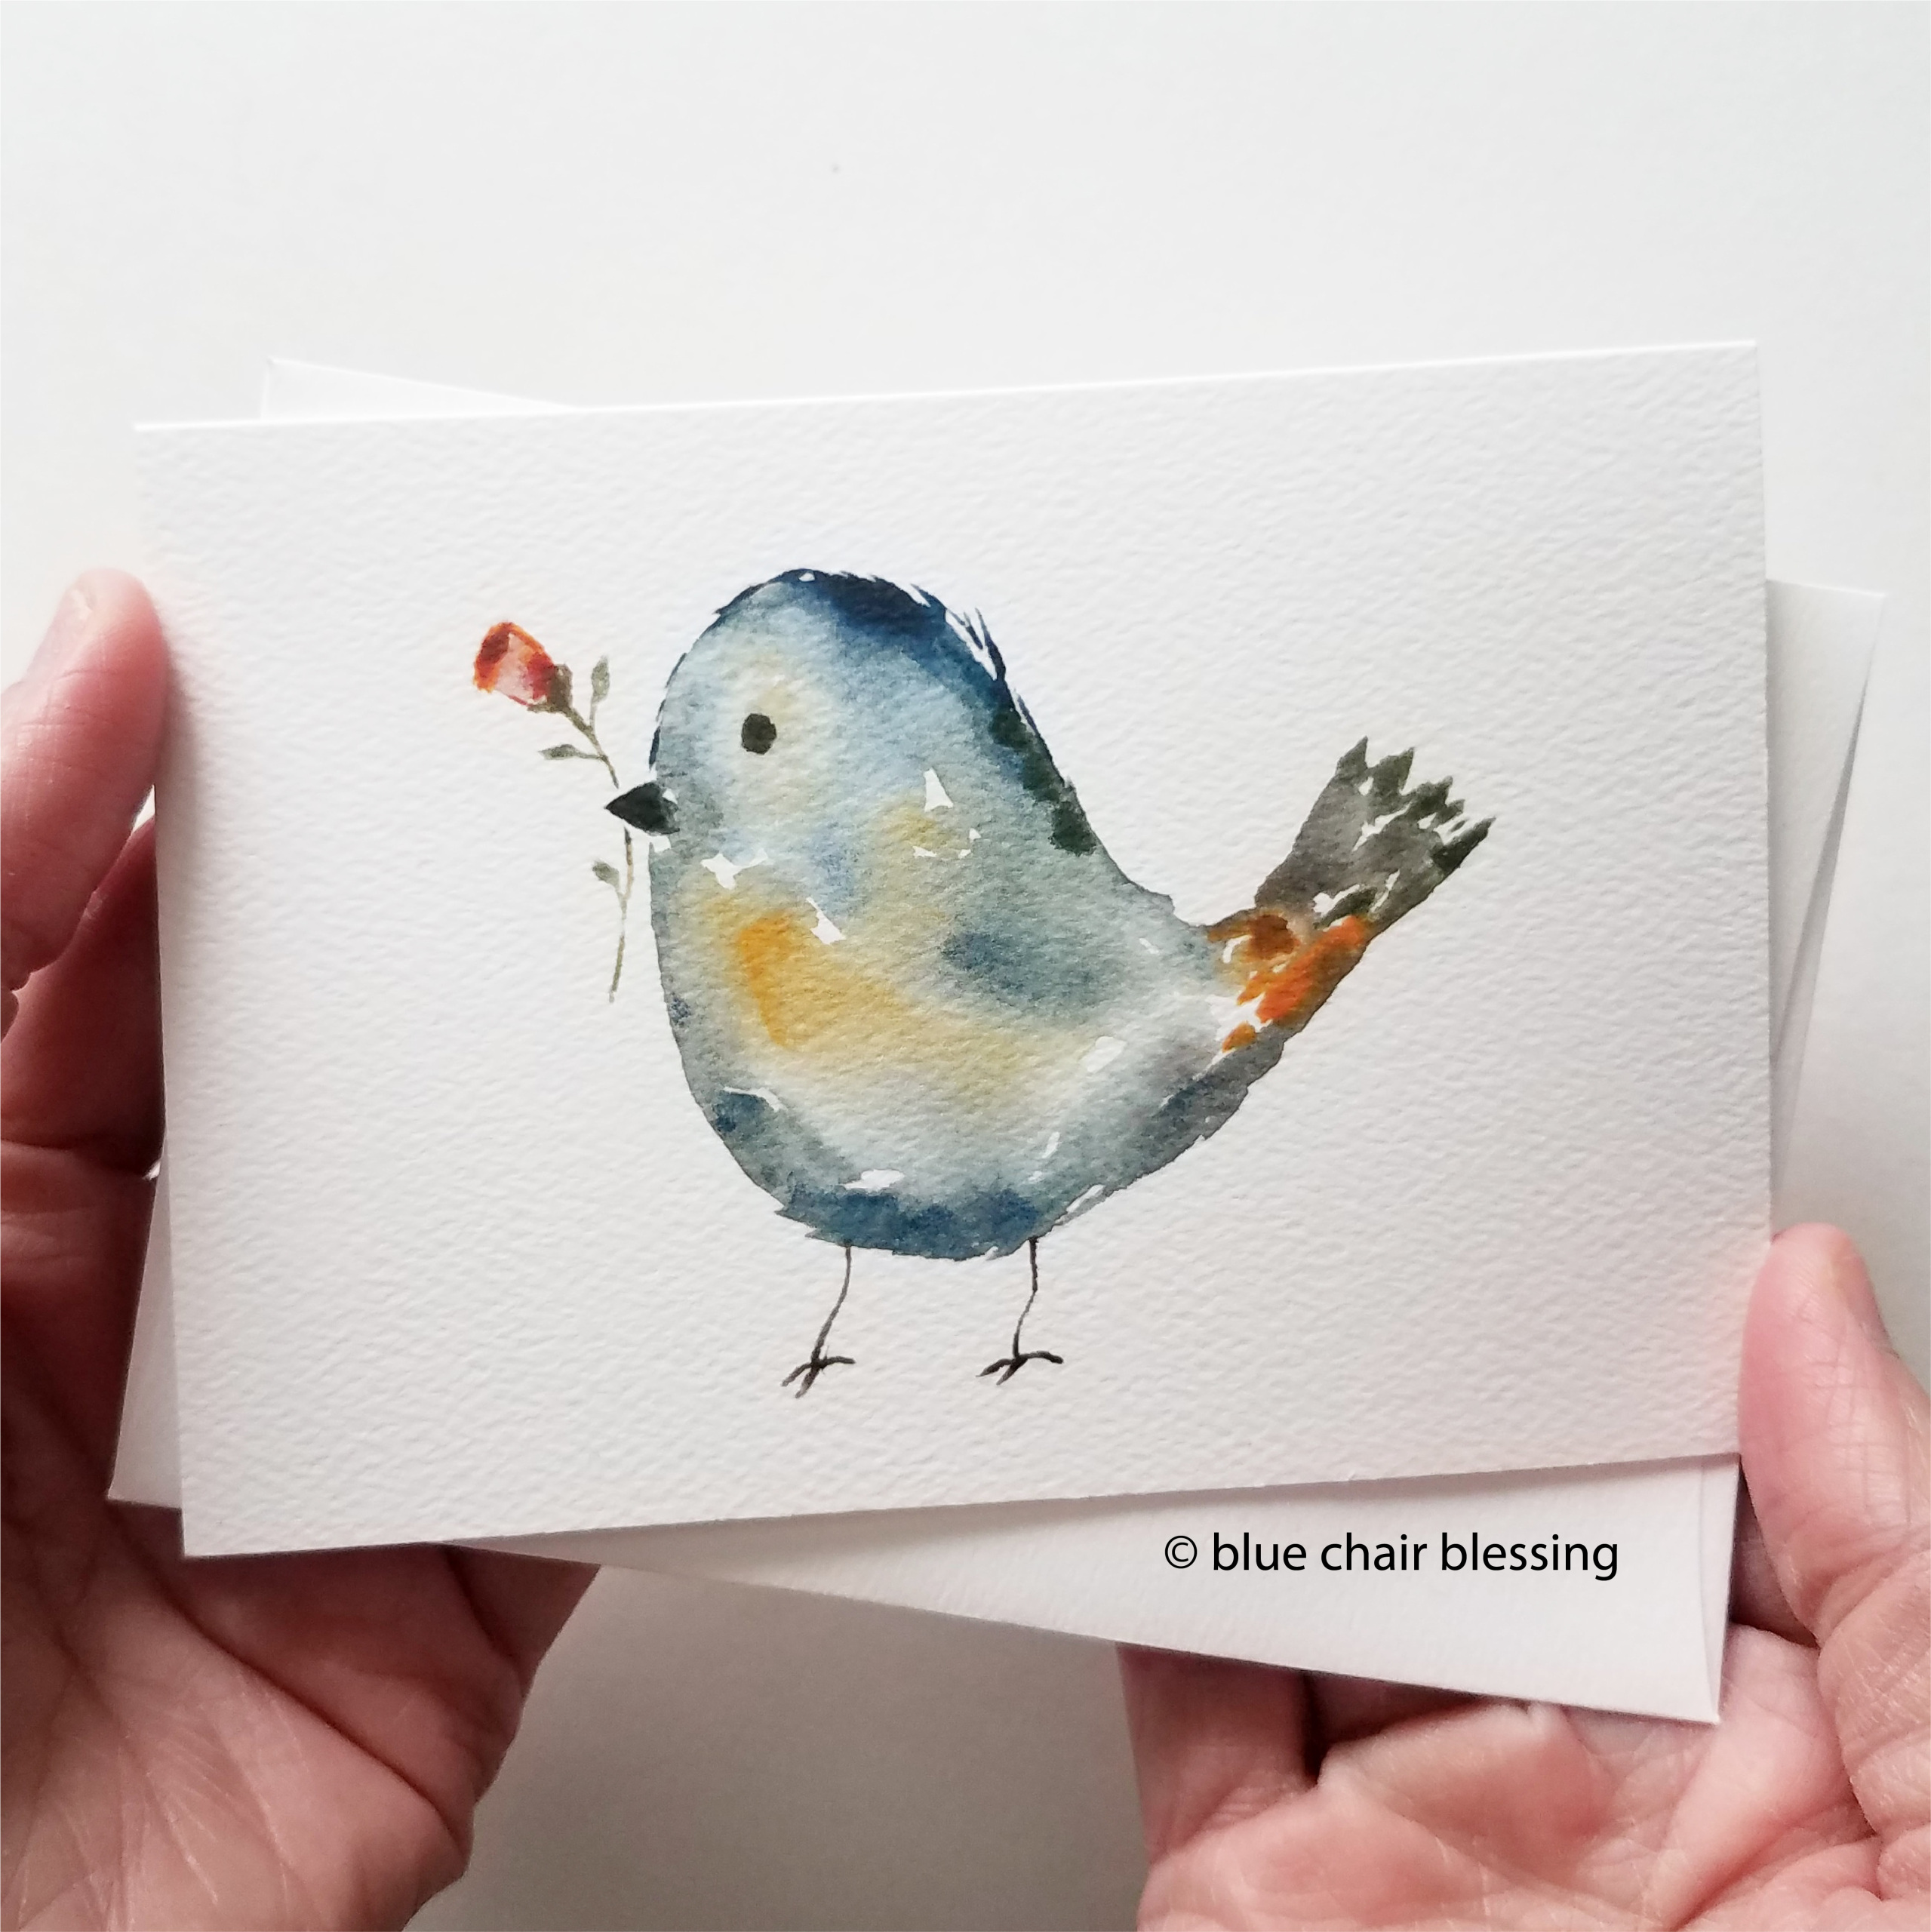 Watercolor painted bird, blank folded notecards. Set of 8 small cards with  envelopes. All the same design.